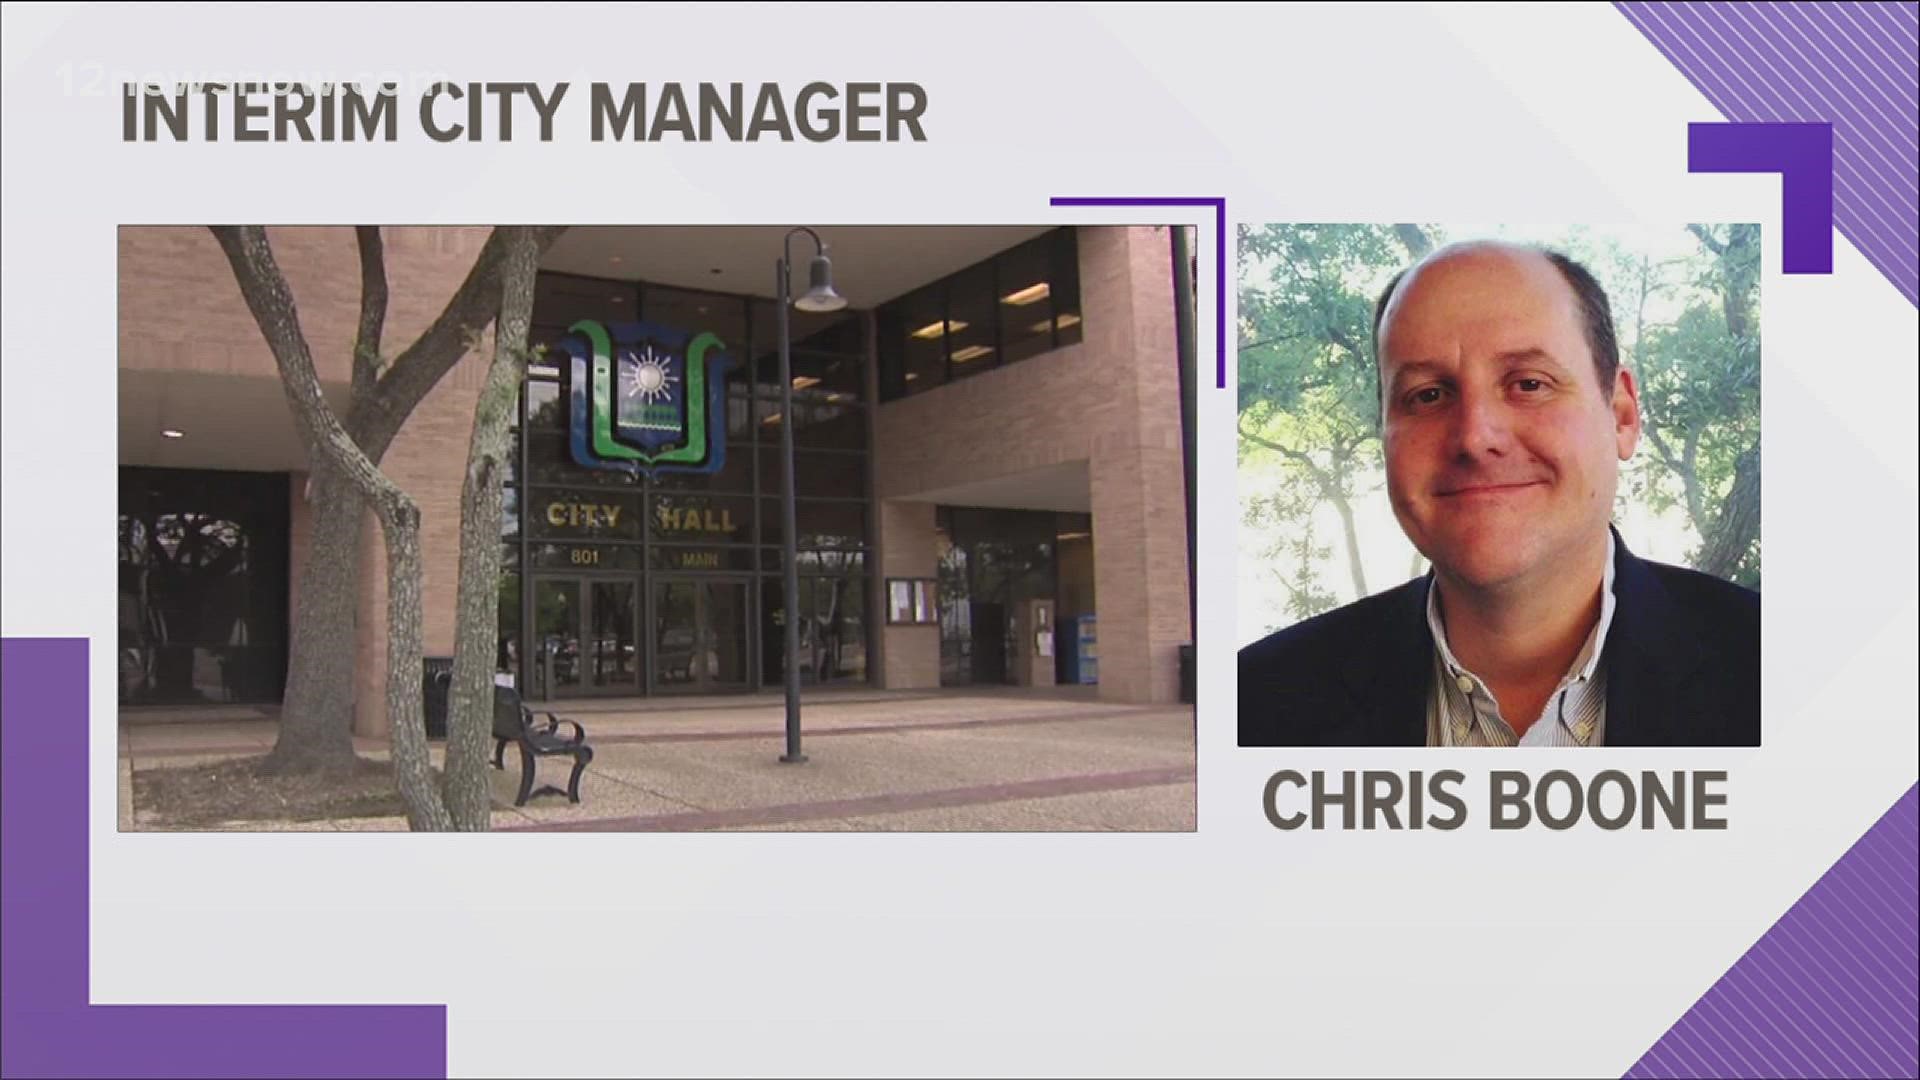 After interviewing four candidates, the council voted Director of Planning & Community Development Chris Boone to temporarily fill the role, effective March 31.